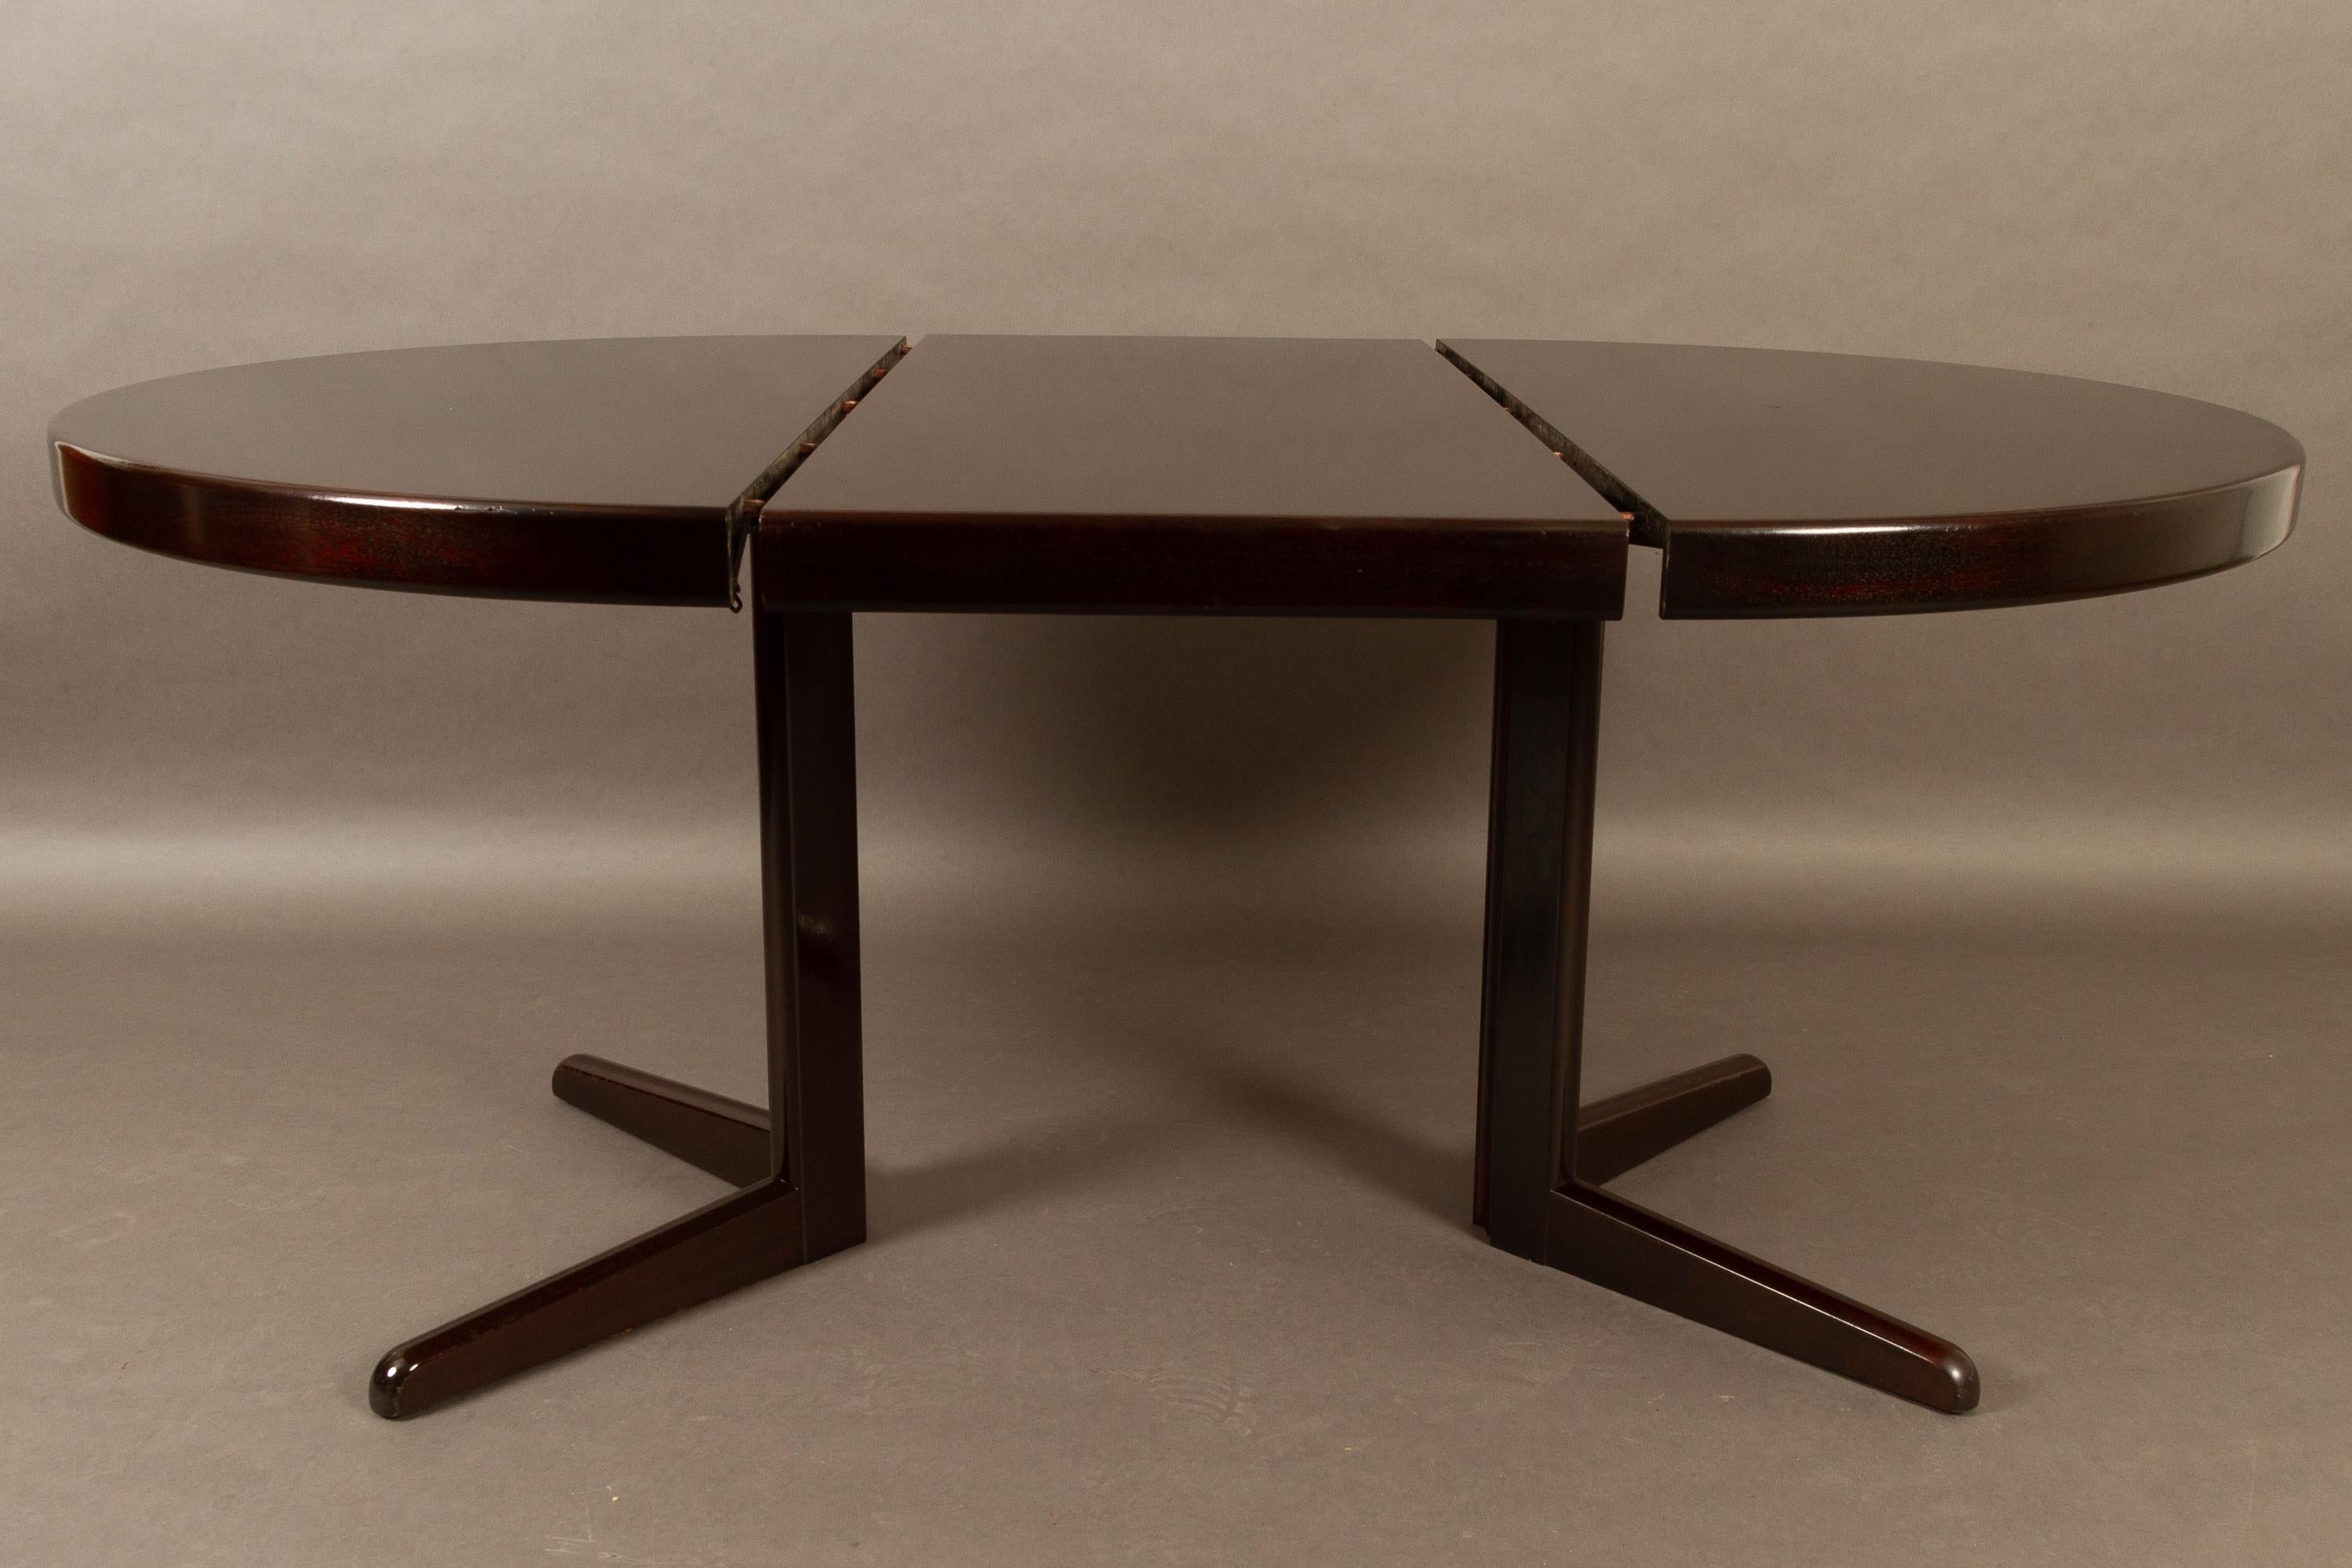 Danish mahogany round extendable dining table by H. W. Klein for Bramin, 1970s.
Elegant round dining table with two extension leaves. Table can be extended up to 215 cm. Dark reddish brown color.
Chairs in photos match this table and are listed as